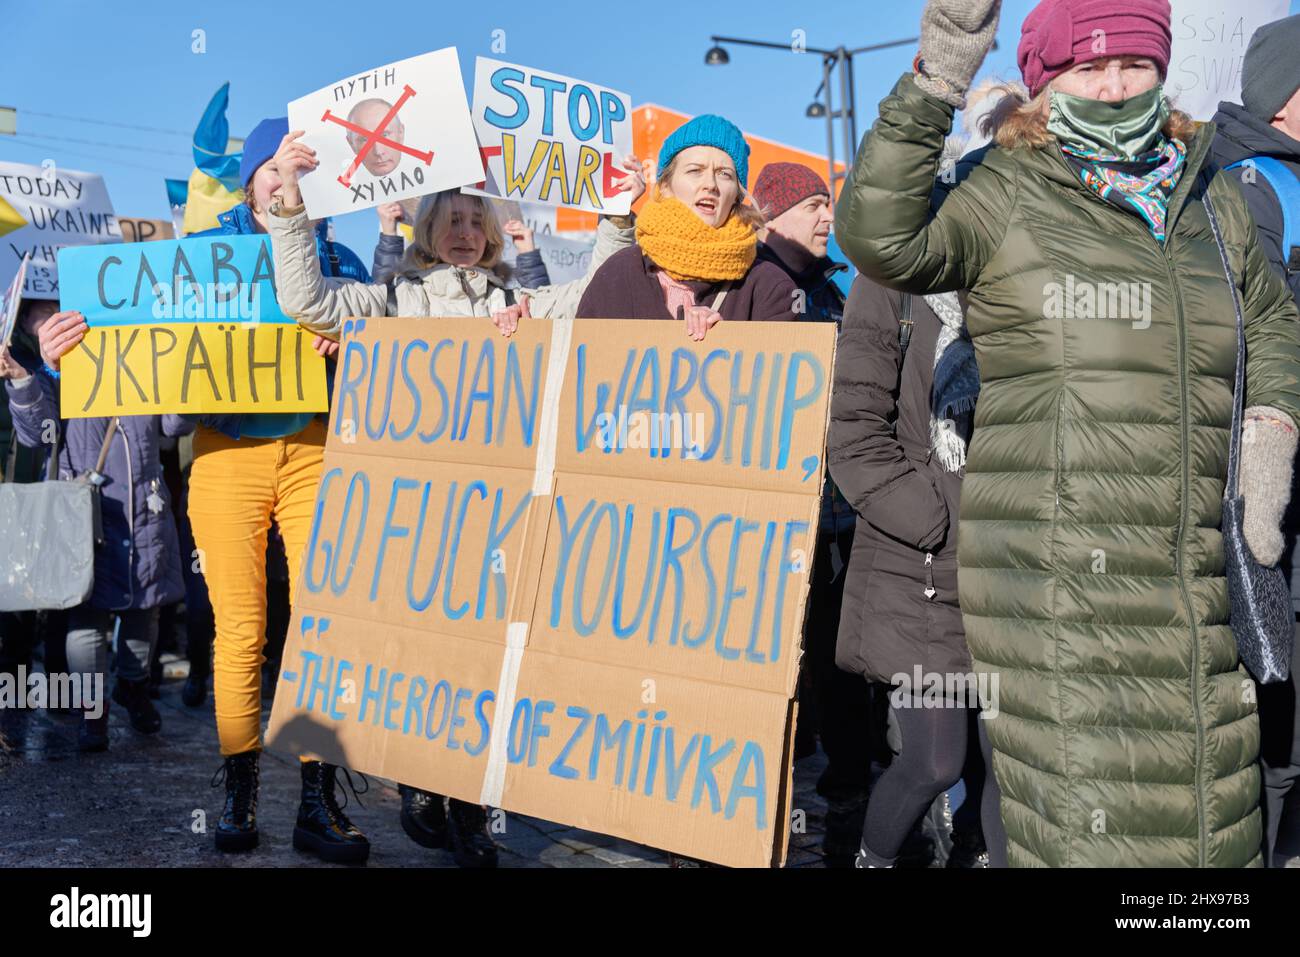 Helsinki; Finland - February 26; 2022: Demonstrators in a rally against Russia’s military aggression and occupation of Ukraine. Stock Photo